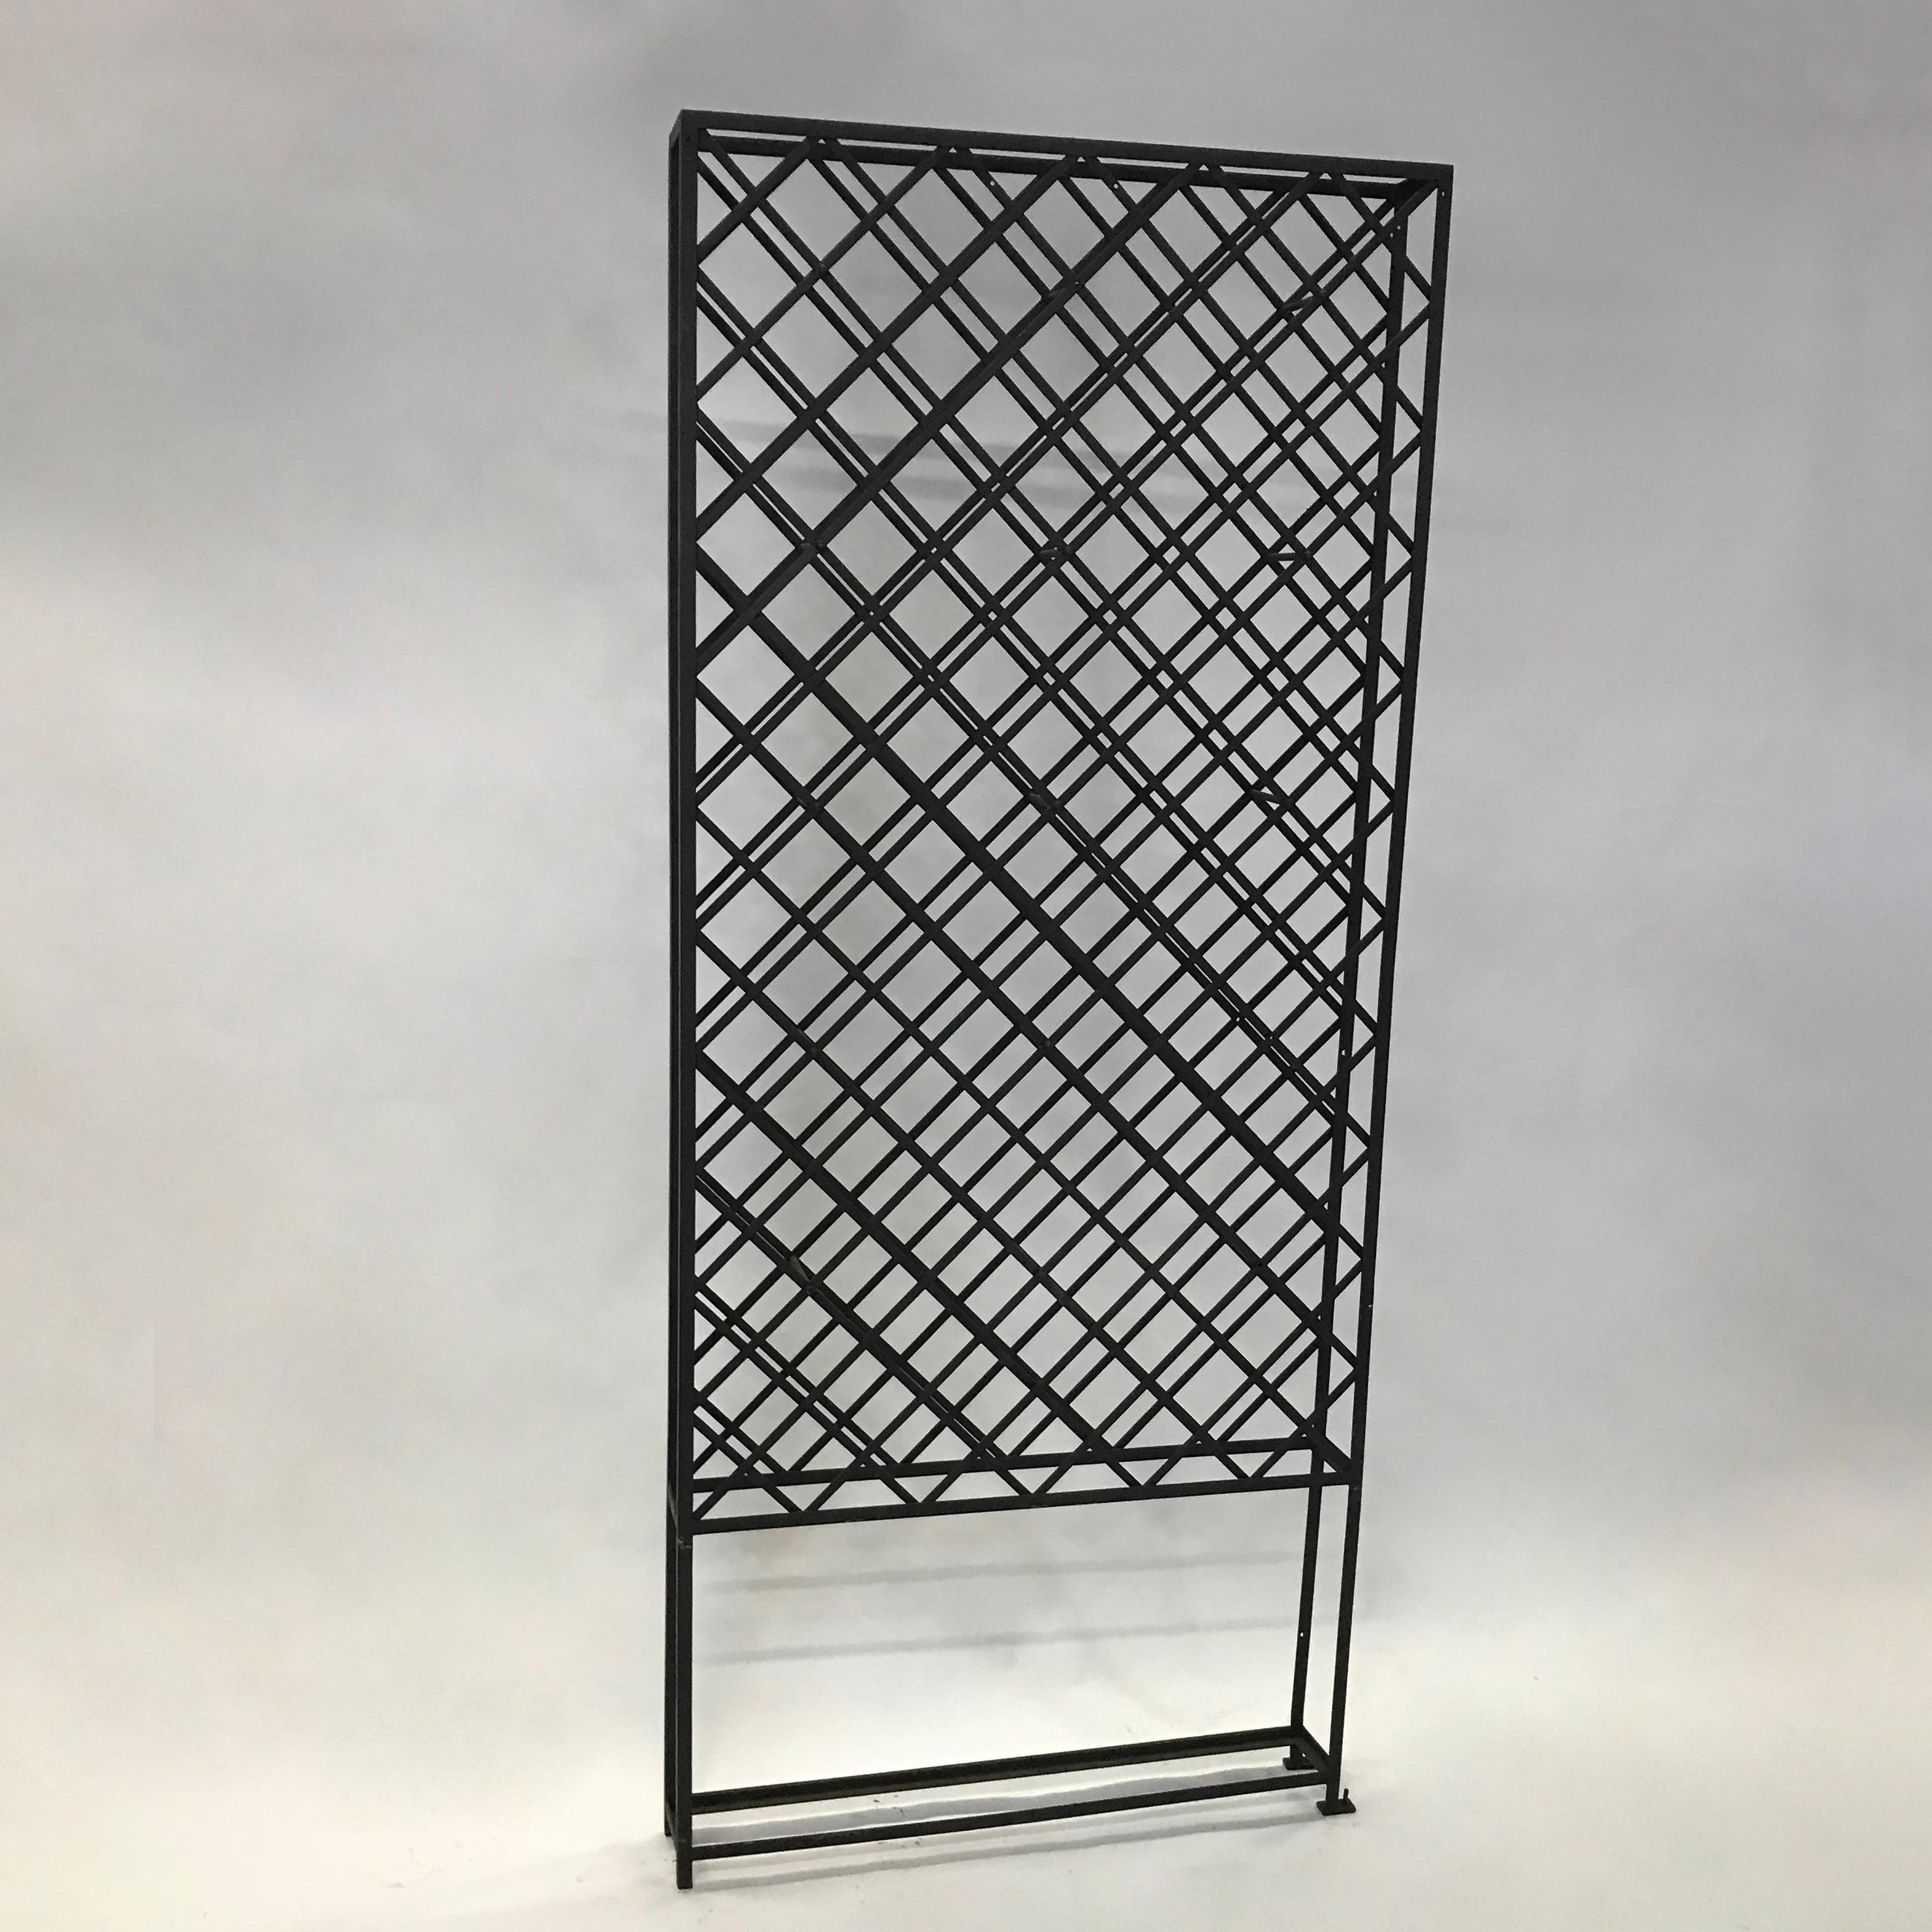 Tall, impressive, latticed wrought iron, standing wine racks can hold up to 50 bottles each. Two racks are available. The racks must be braced for stability.